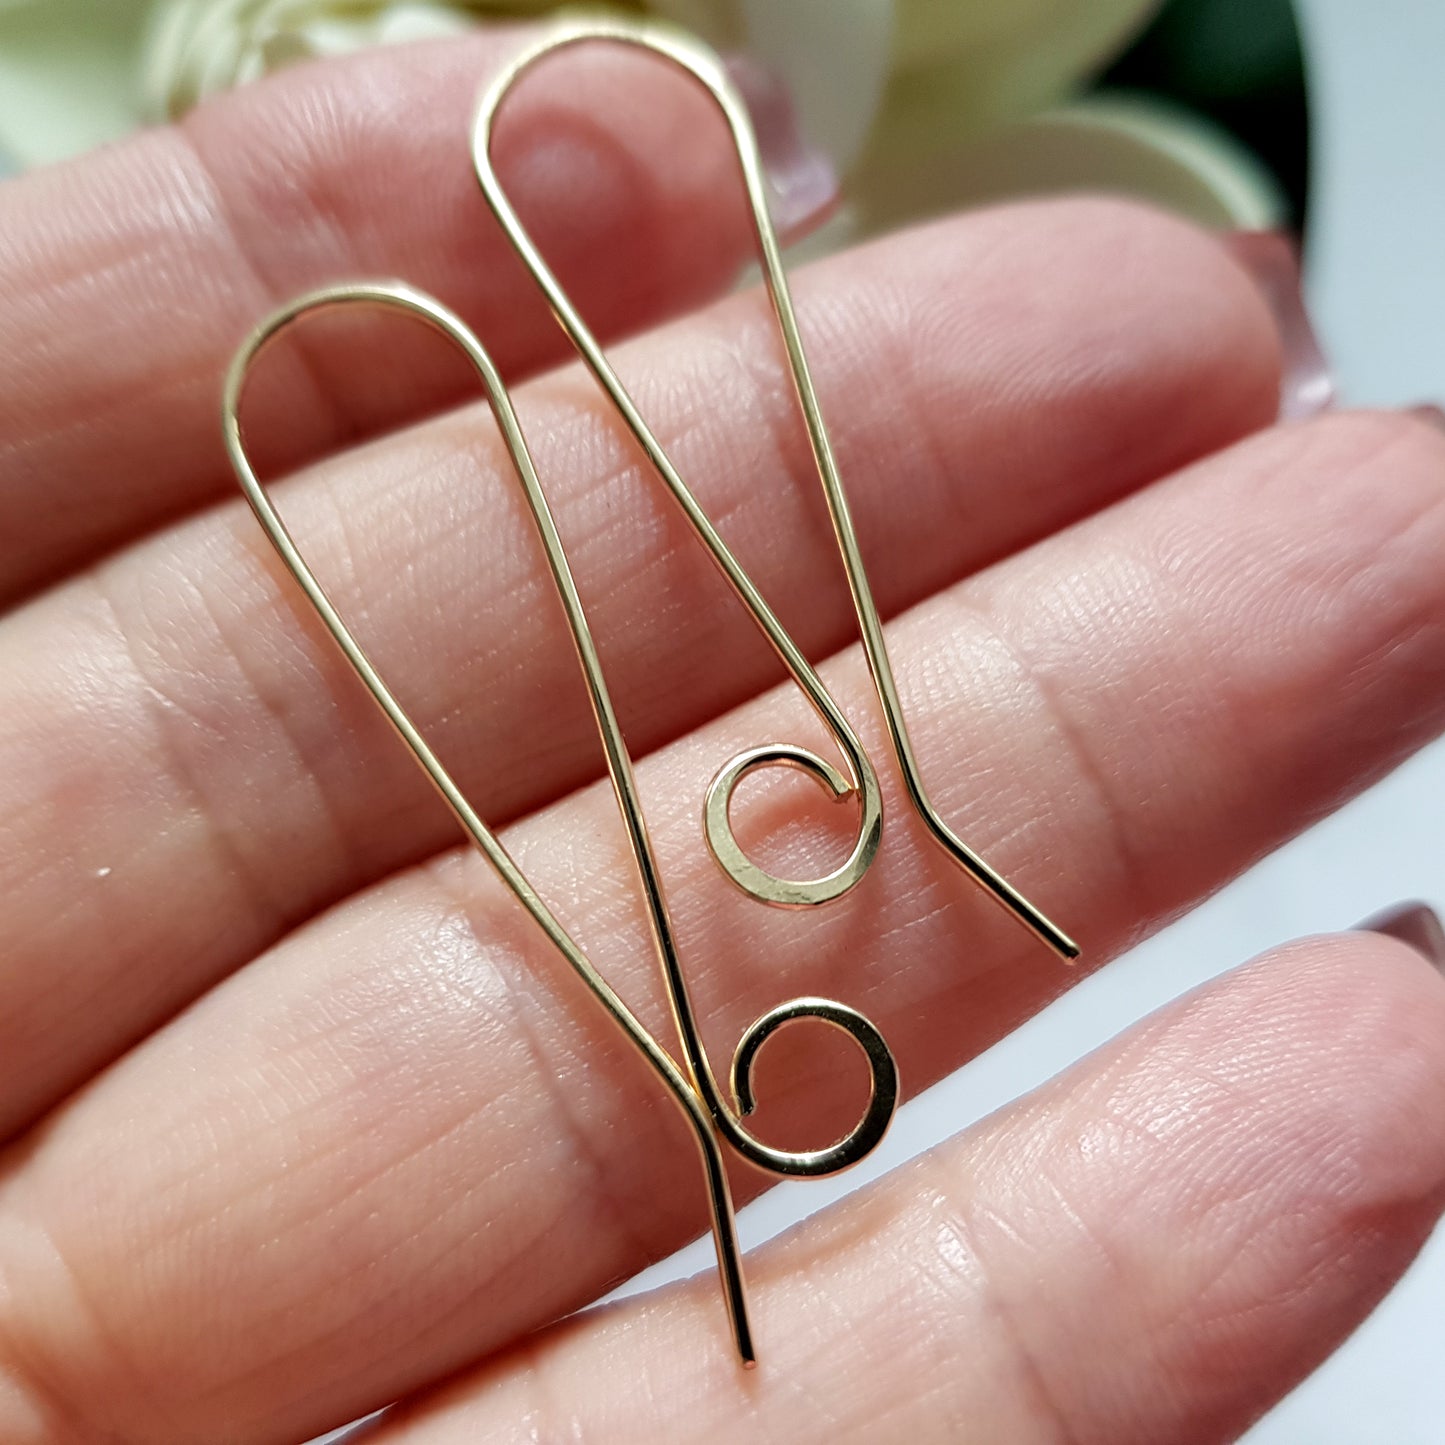 SH304-Flat Fish Hook Earring Wires 14x14mm Gold Filled (Pair